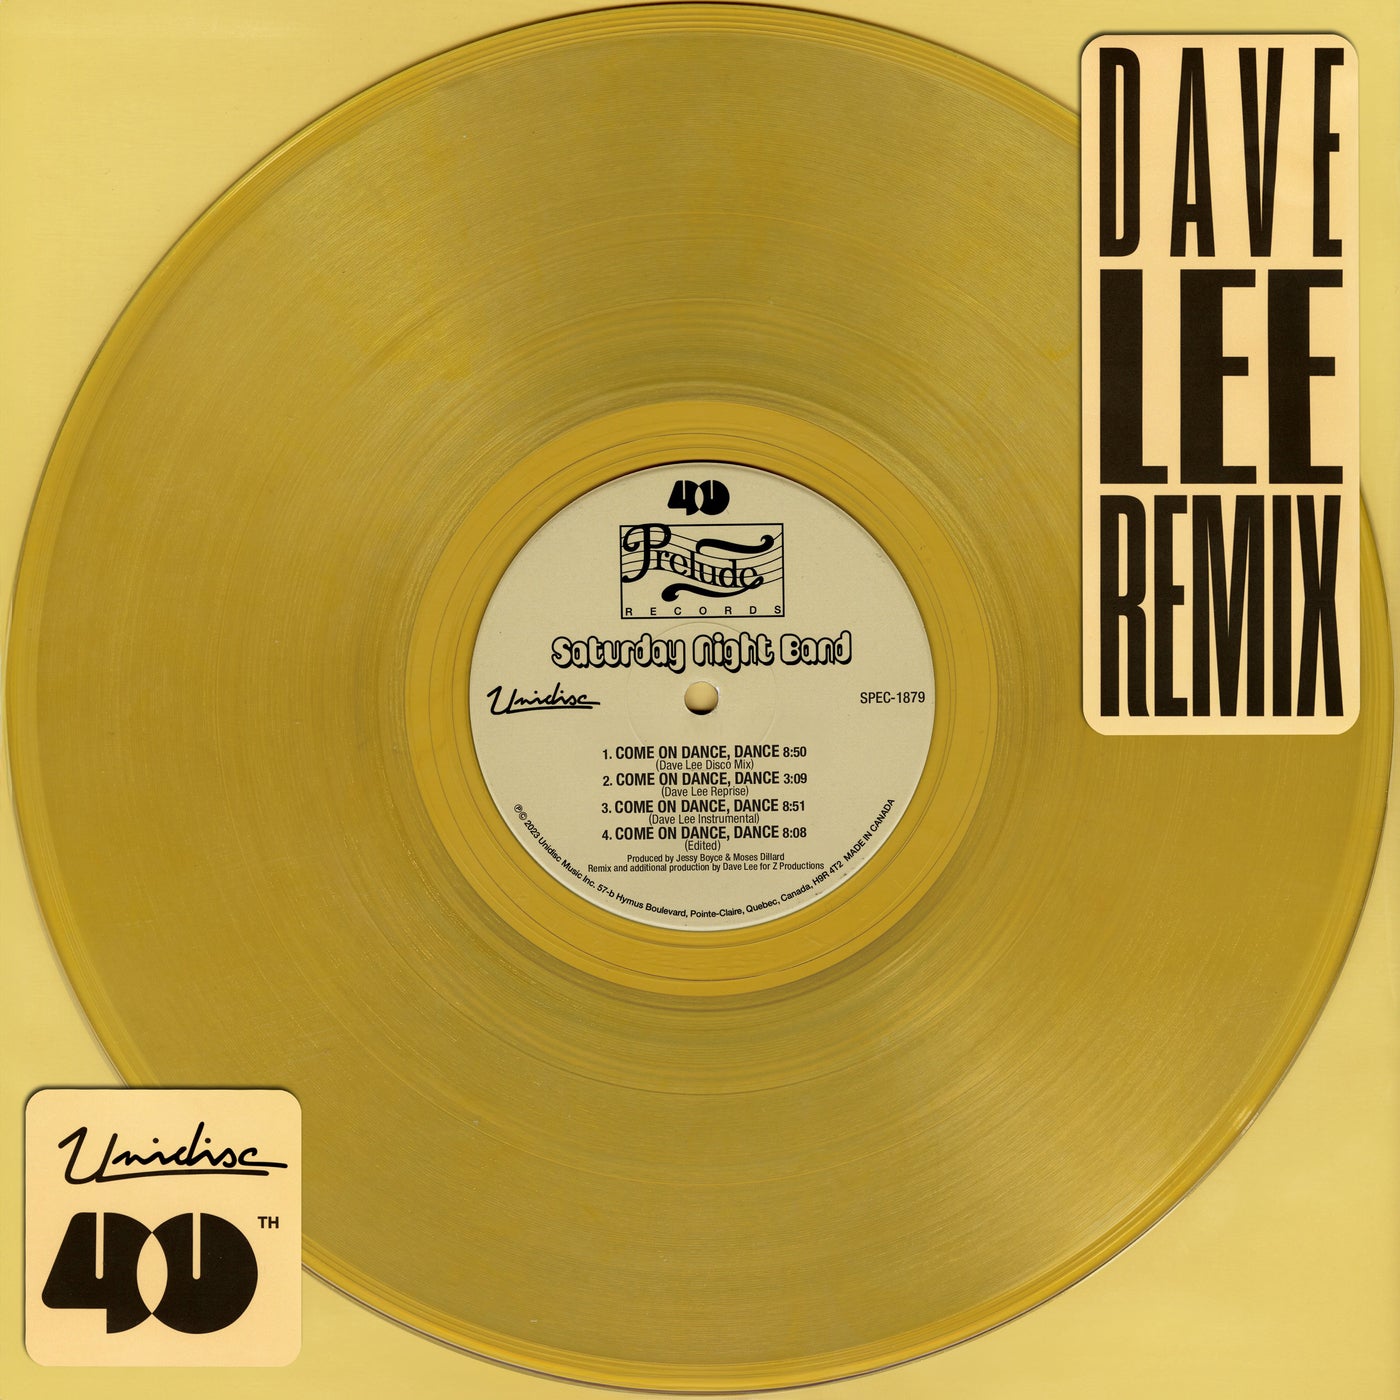 Come On Dance, Dance (Dave Lee Remix)